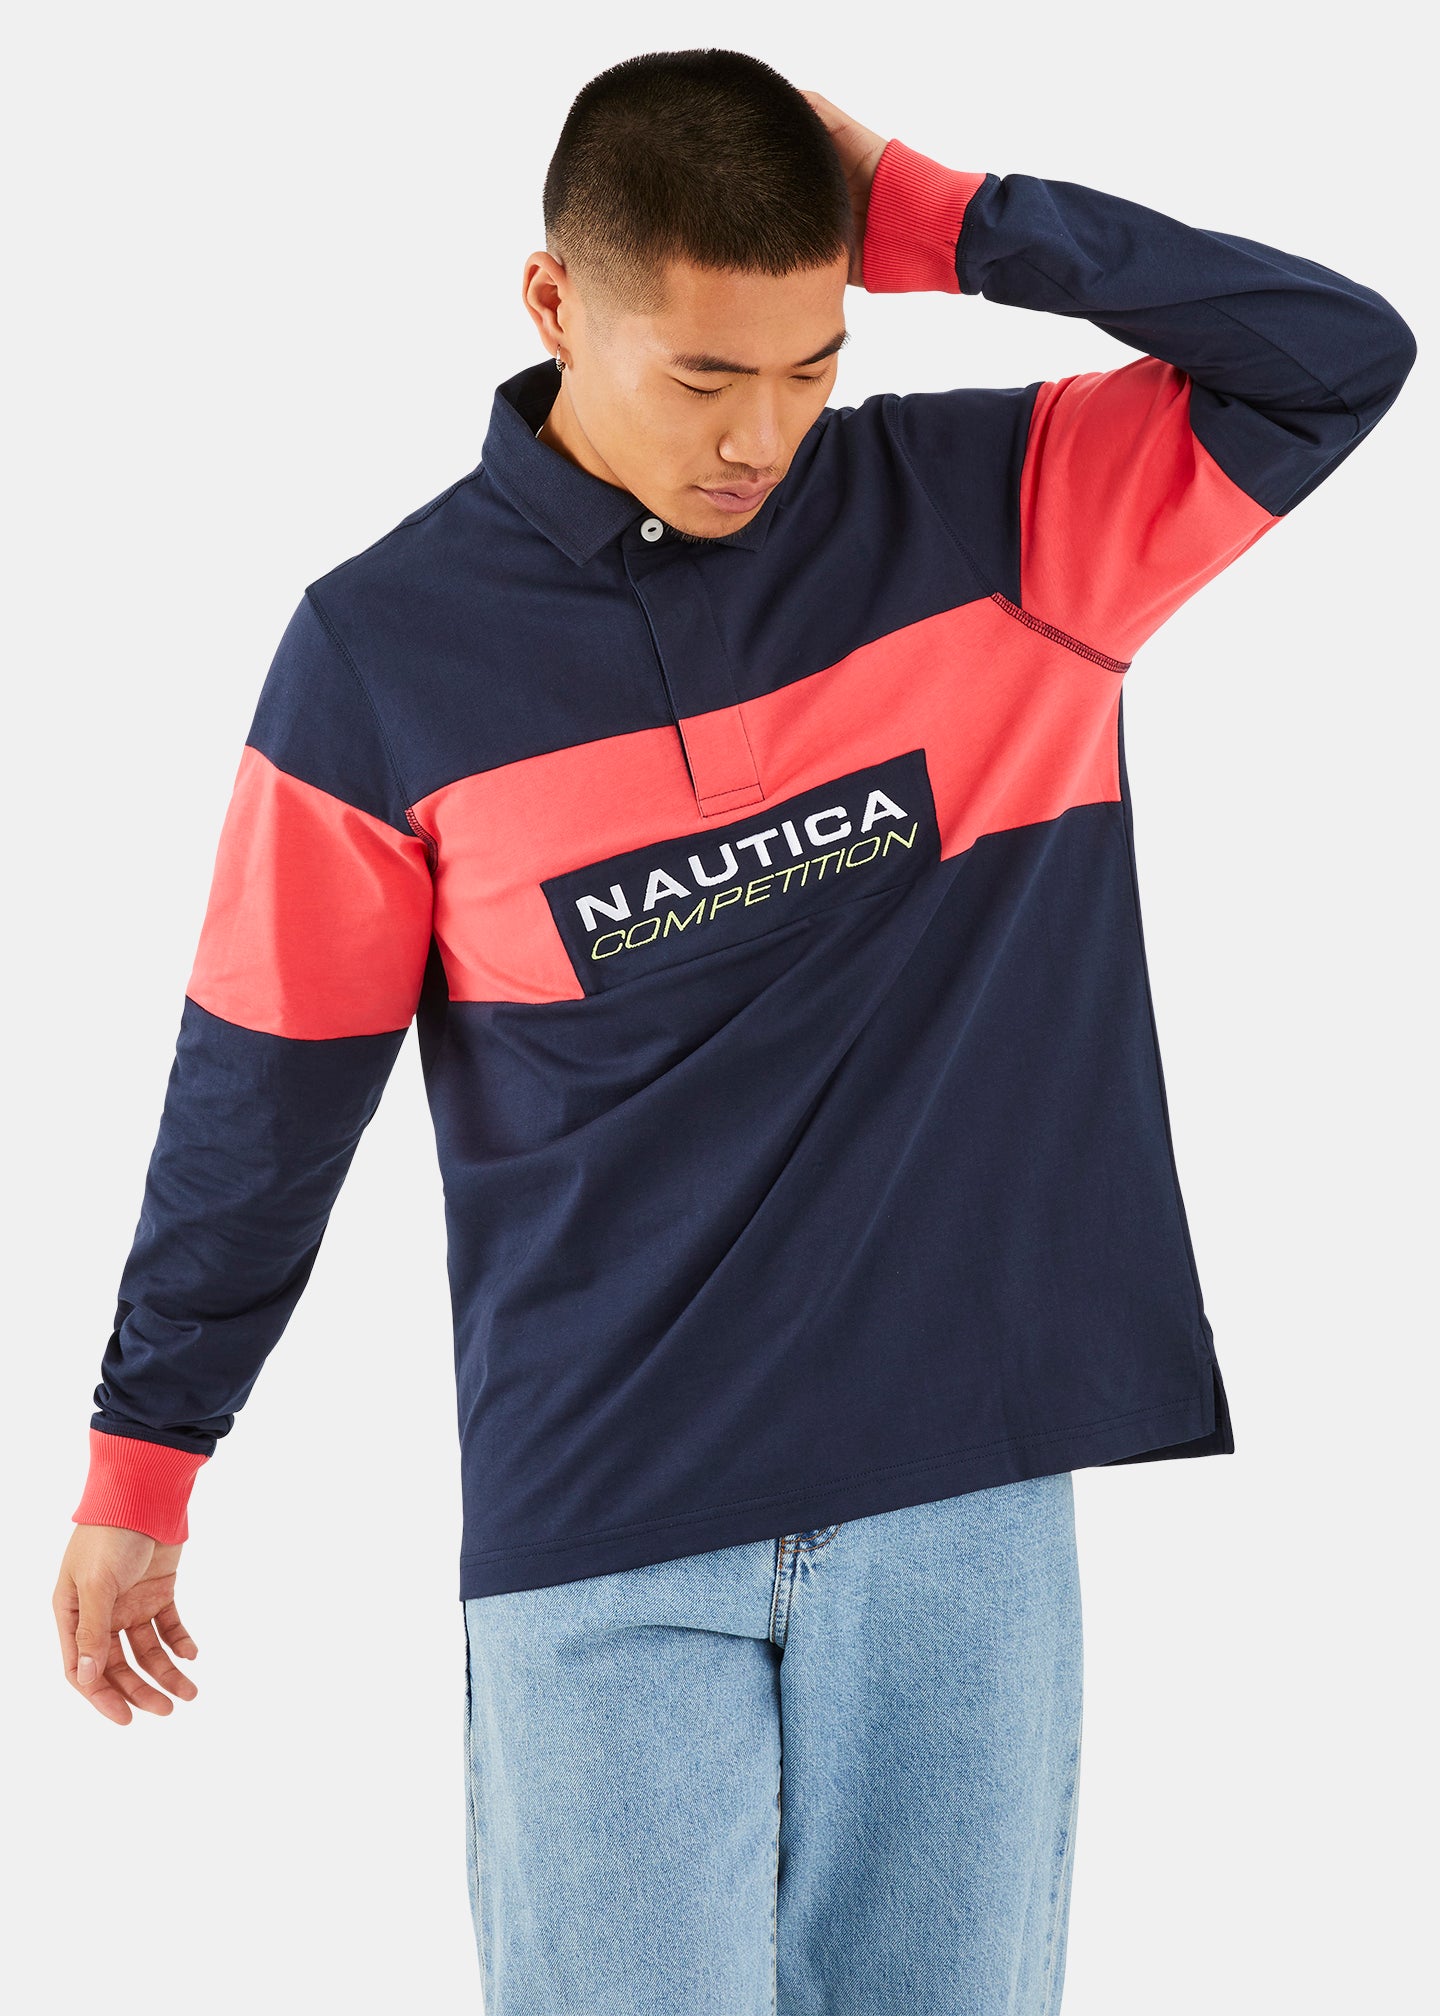 Nautica Competition Trey Rugby Shirt - Dark Navy - Front